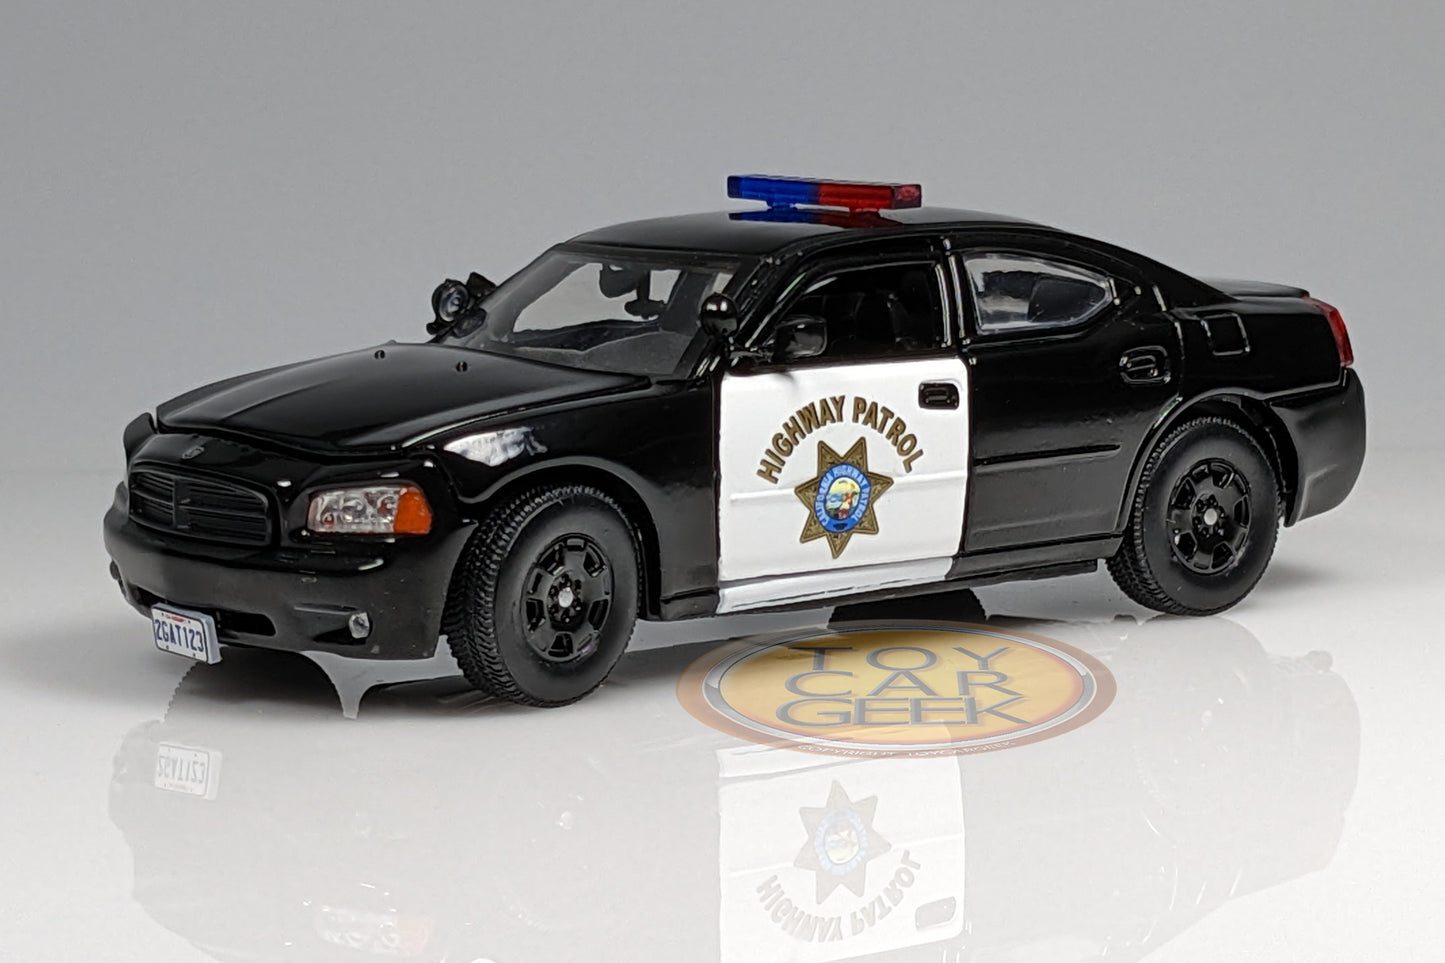 2006 Dodge Charger, California Highway Patrol